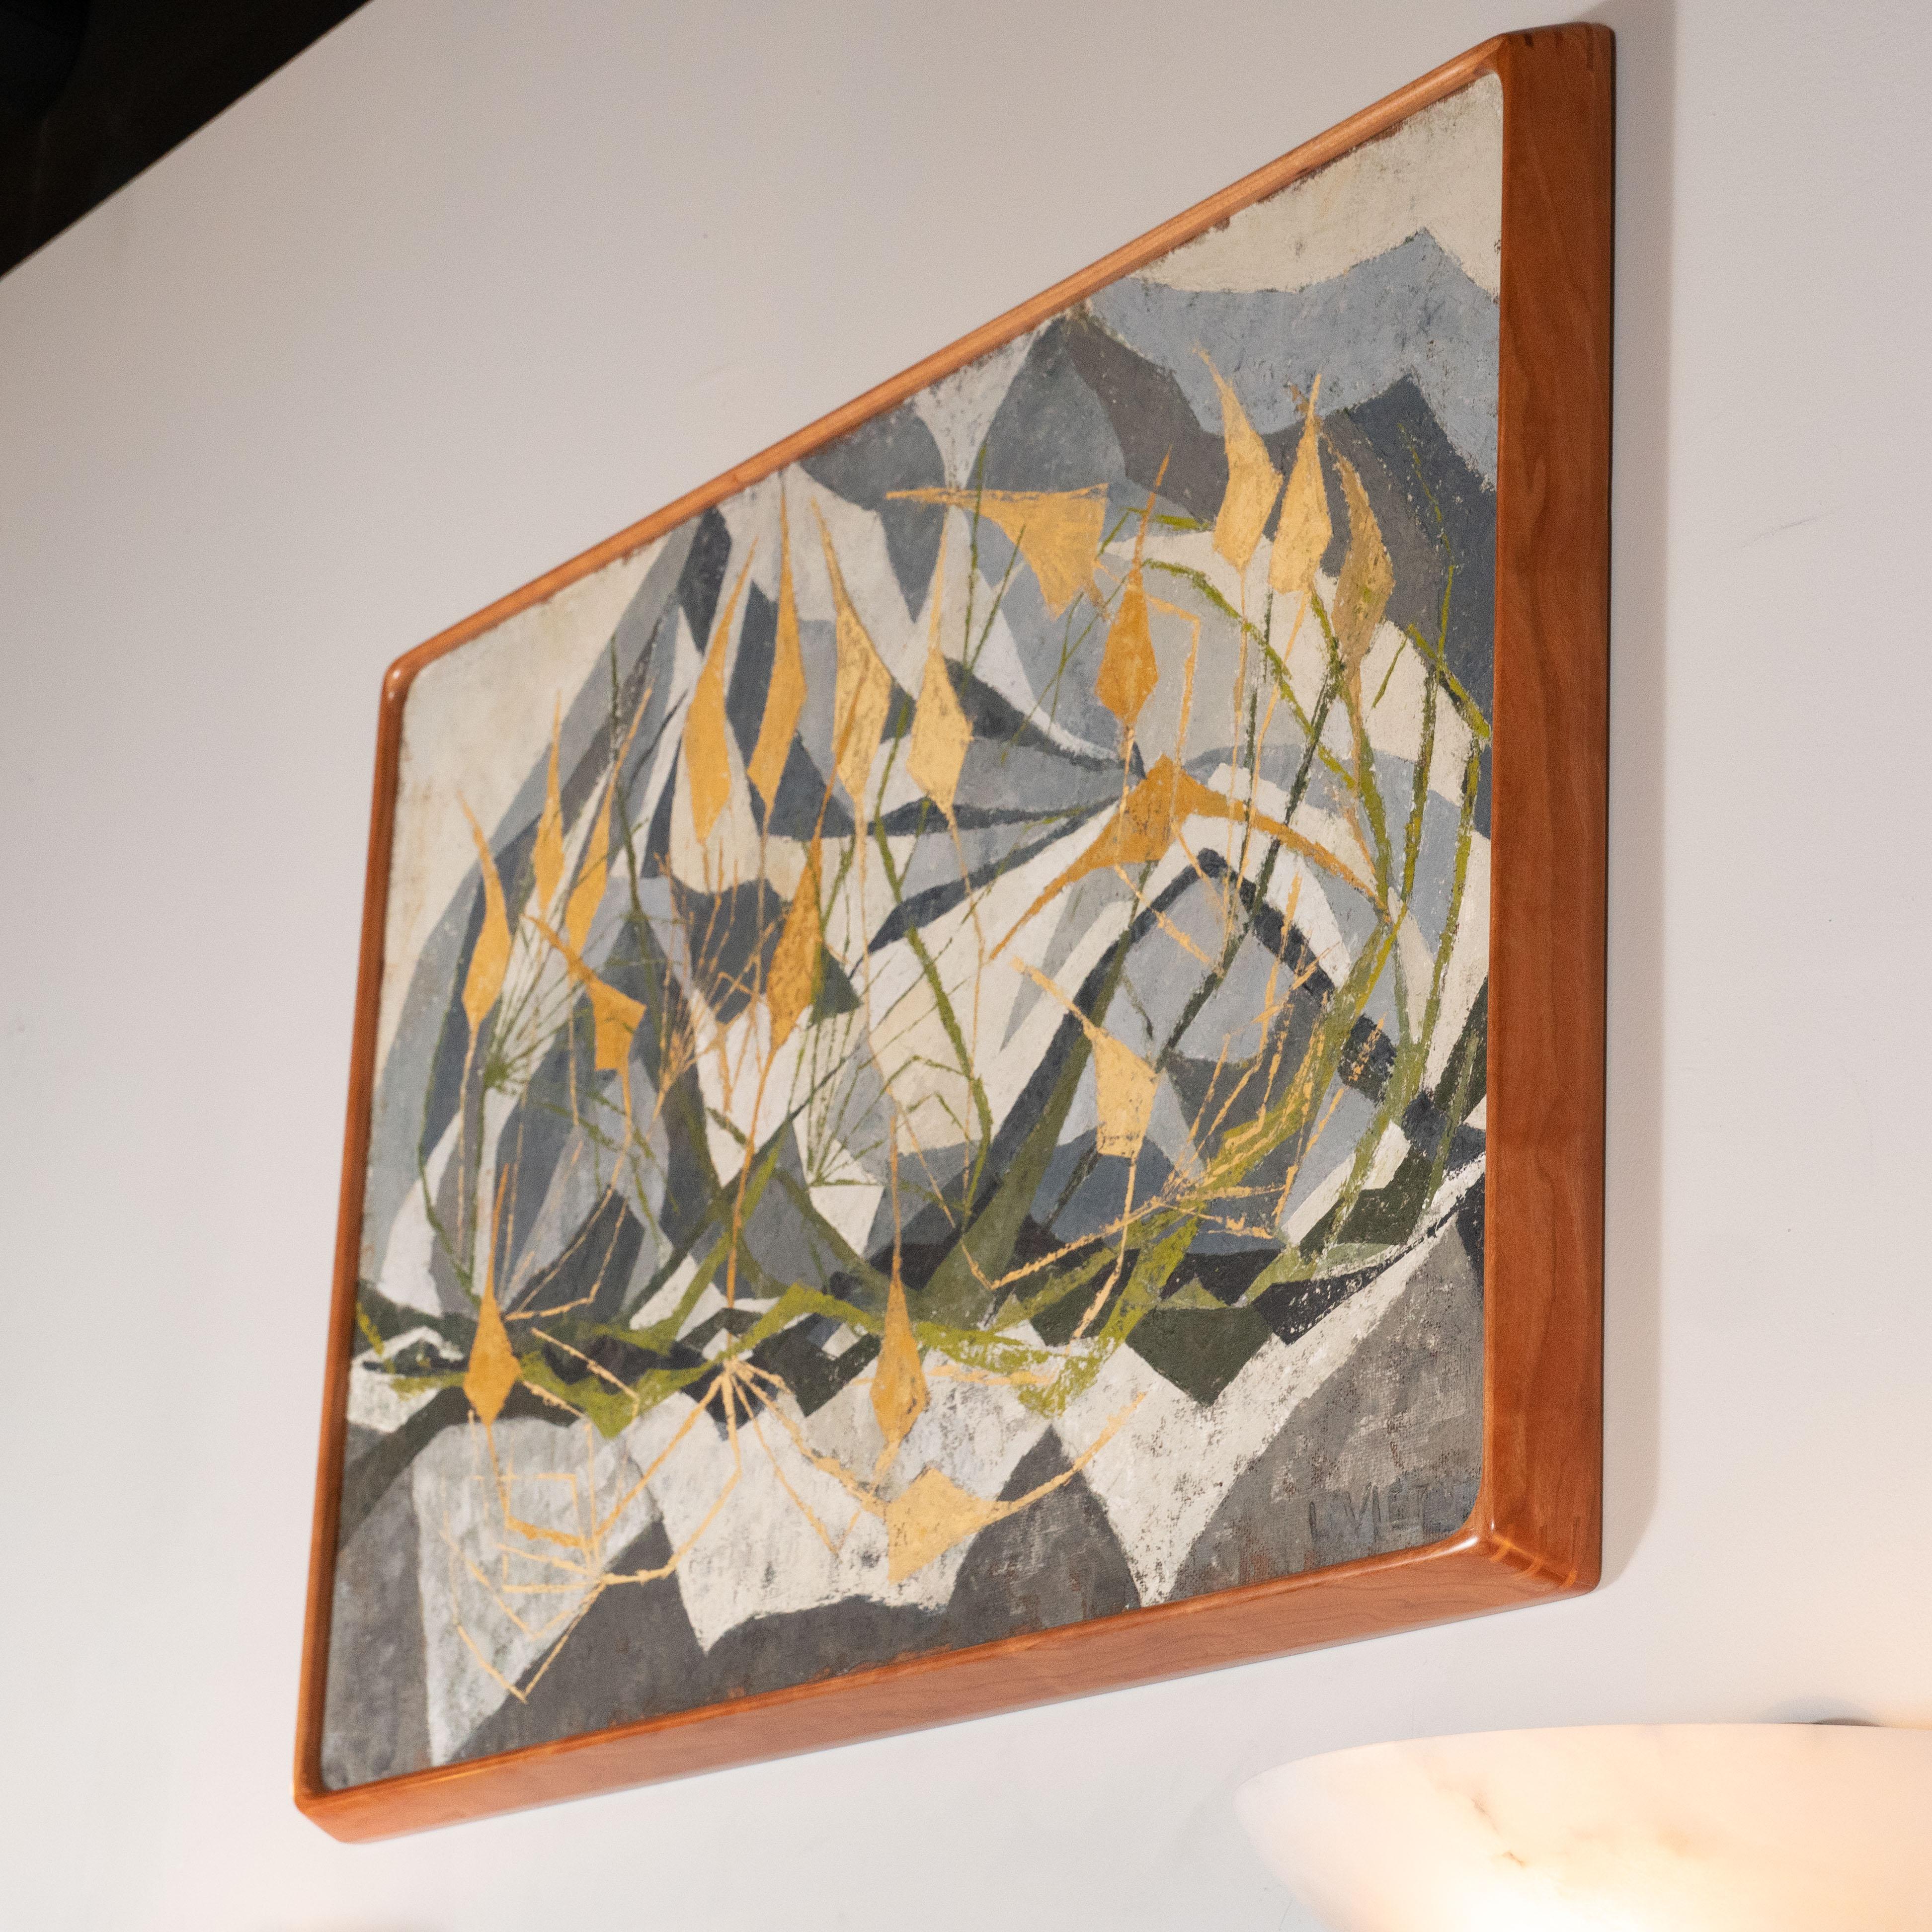 This refined Mid Century Modern abstract painting was realized in the United States, circa 1960. A collection of wheat colored tendrils attached to kite-like forms spring up against a background mosaic of geometric forms in grisaille tones. There is